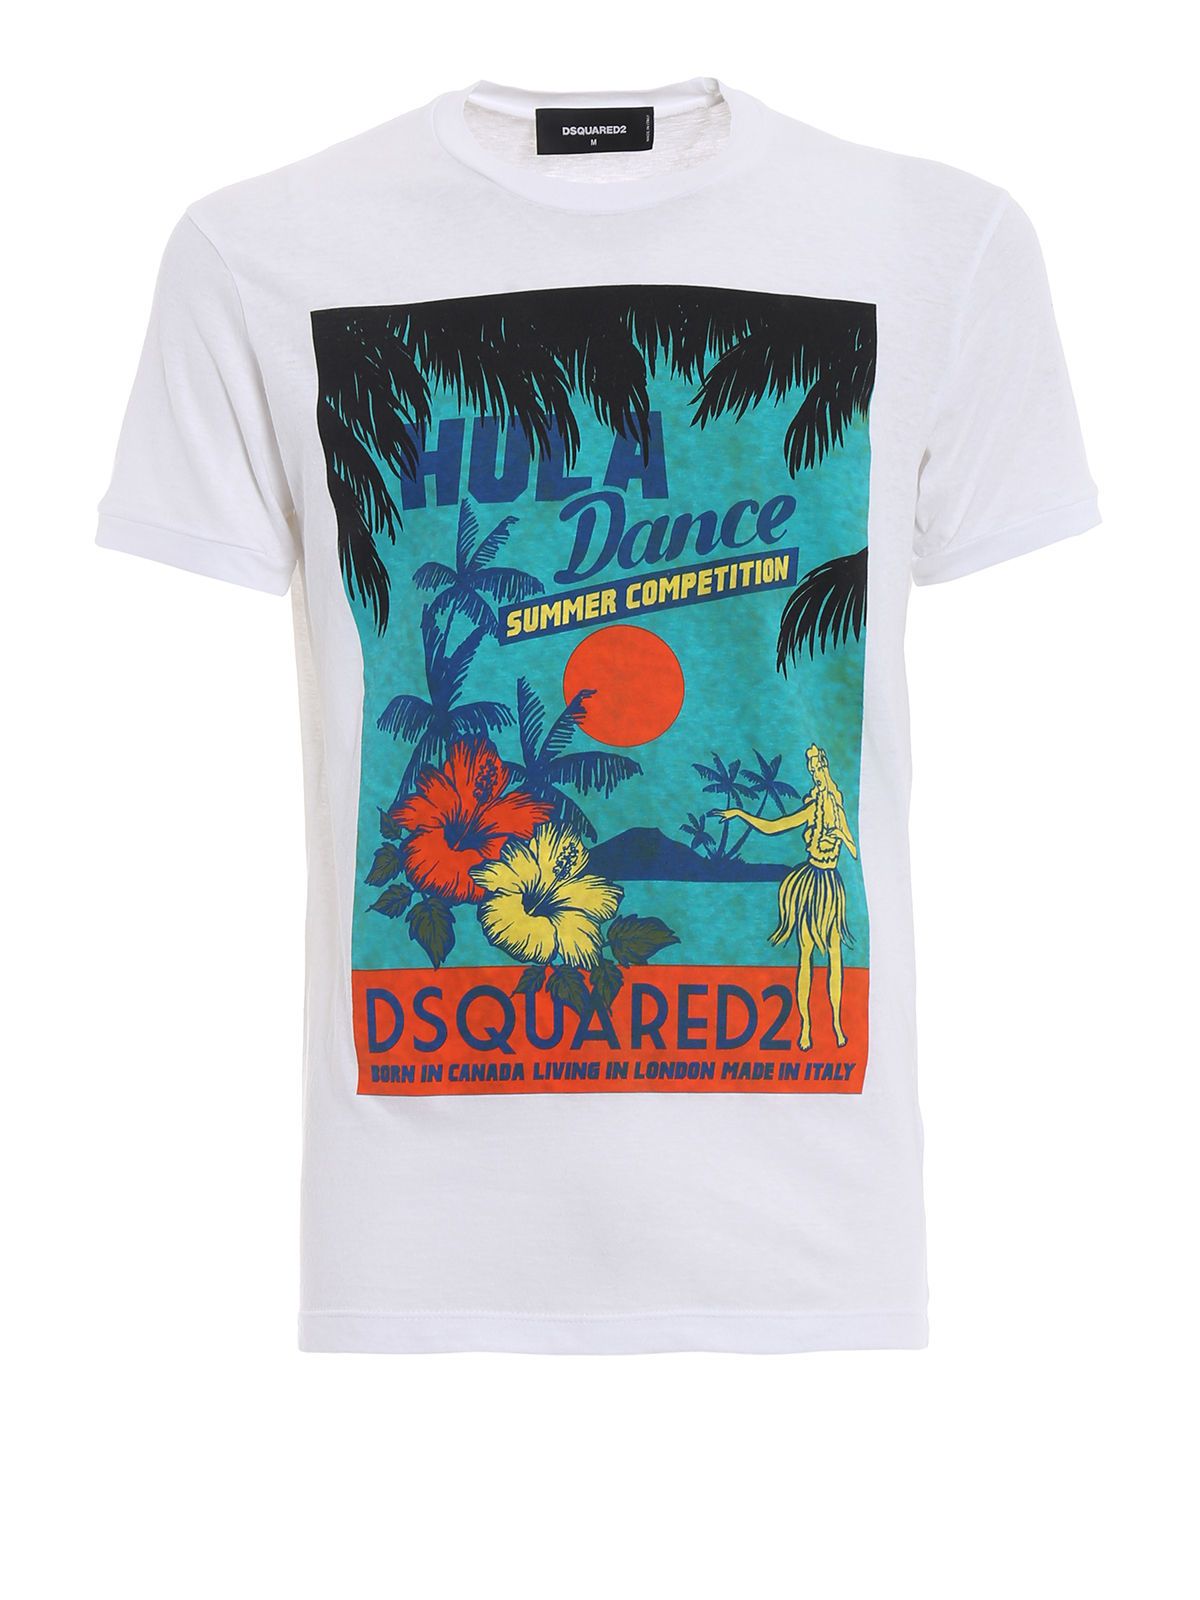 dsquared2 <strong>hula<\/strong> dance print t-shirt